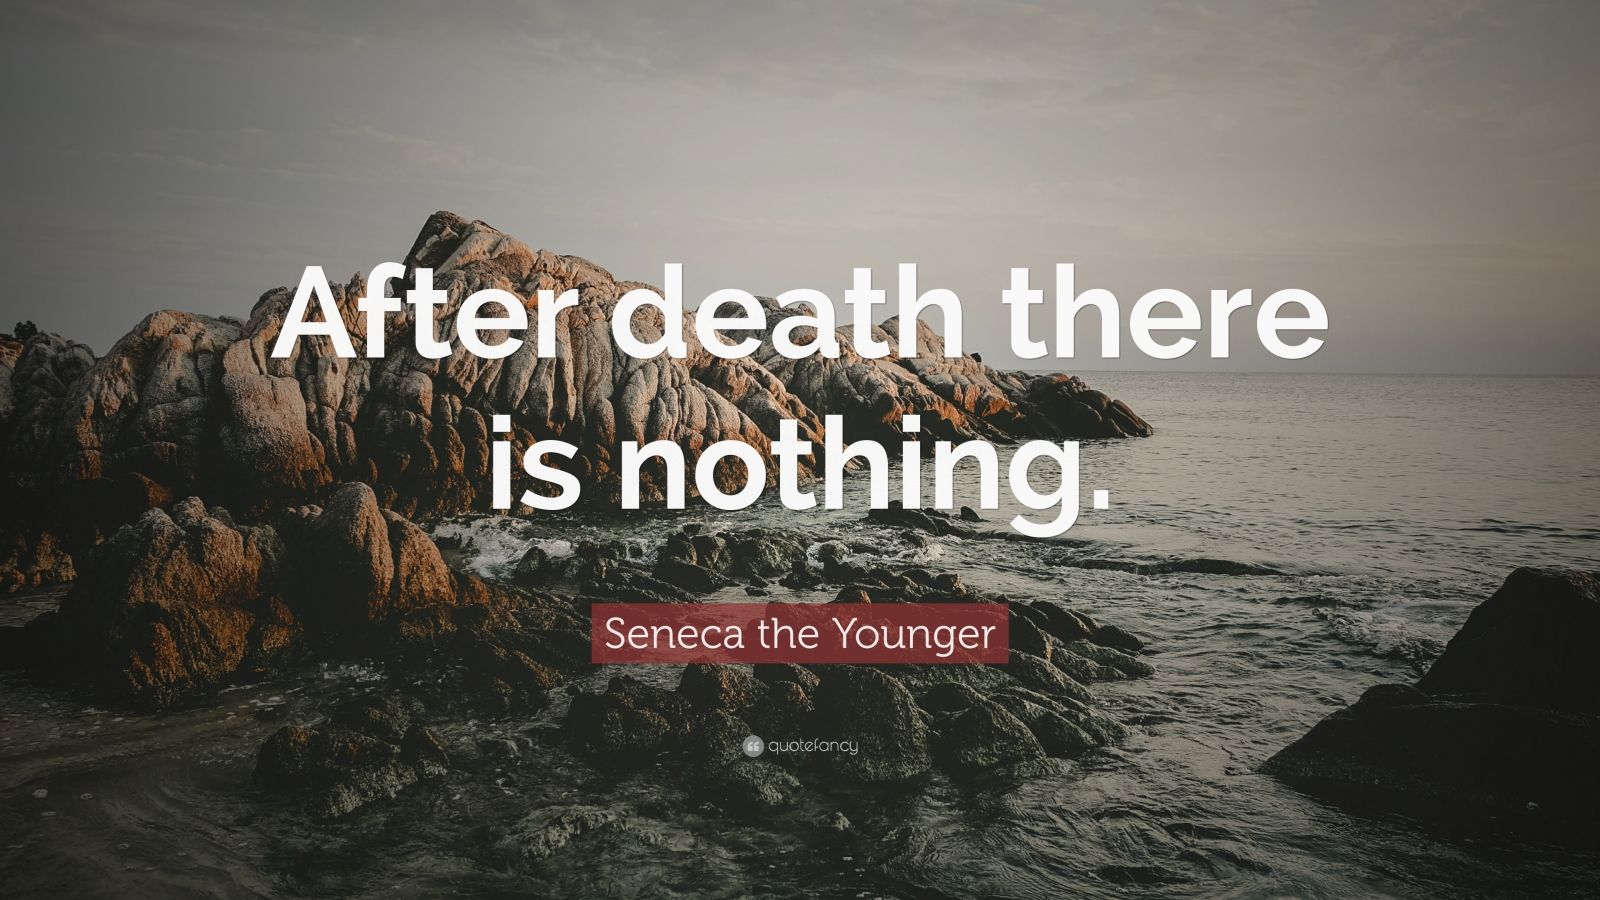 Seneca the Younger Quote: “After death there is nothing.” (7 wallpapers ...